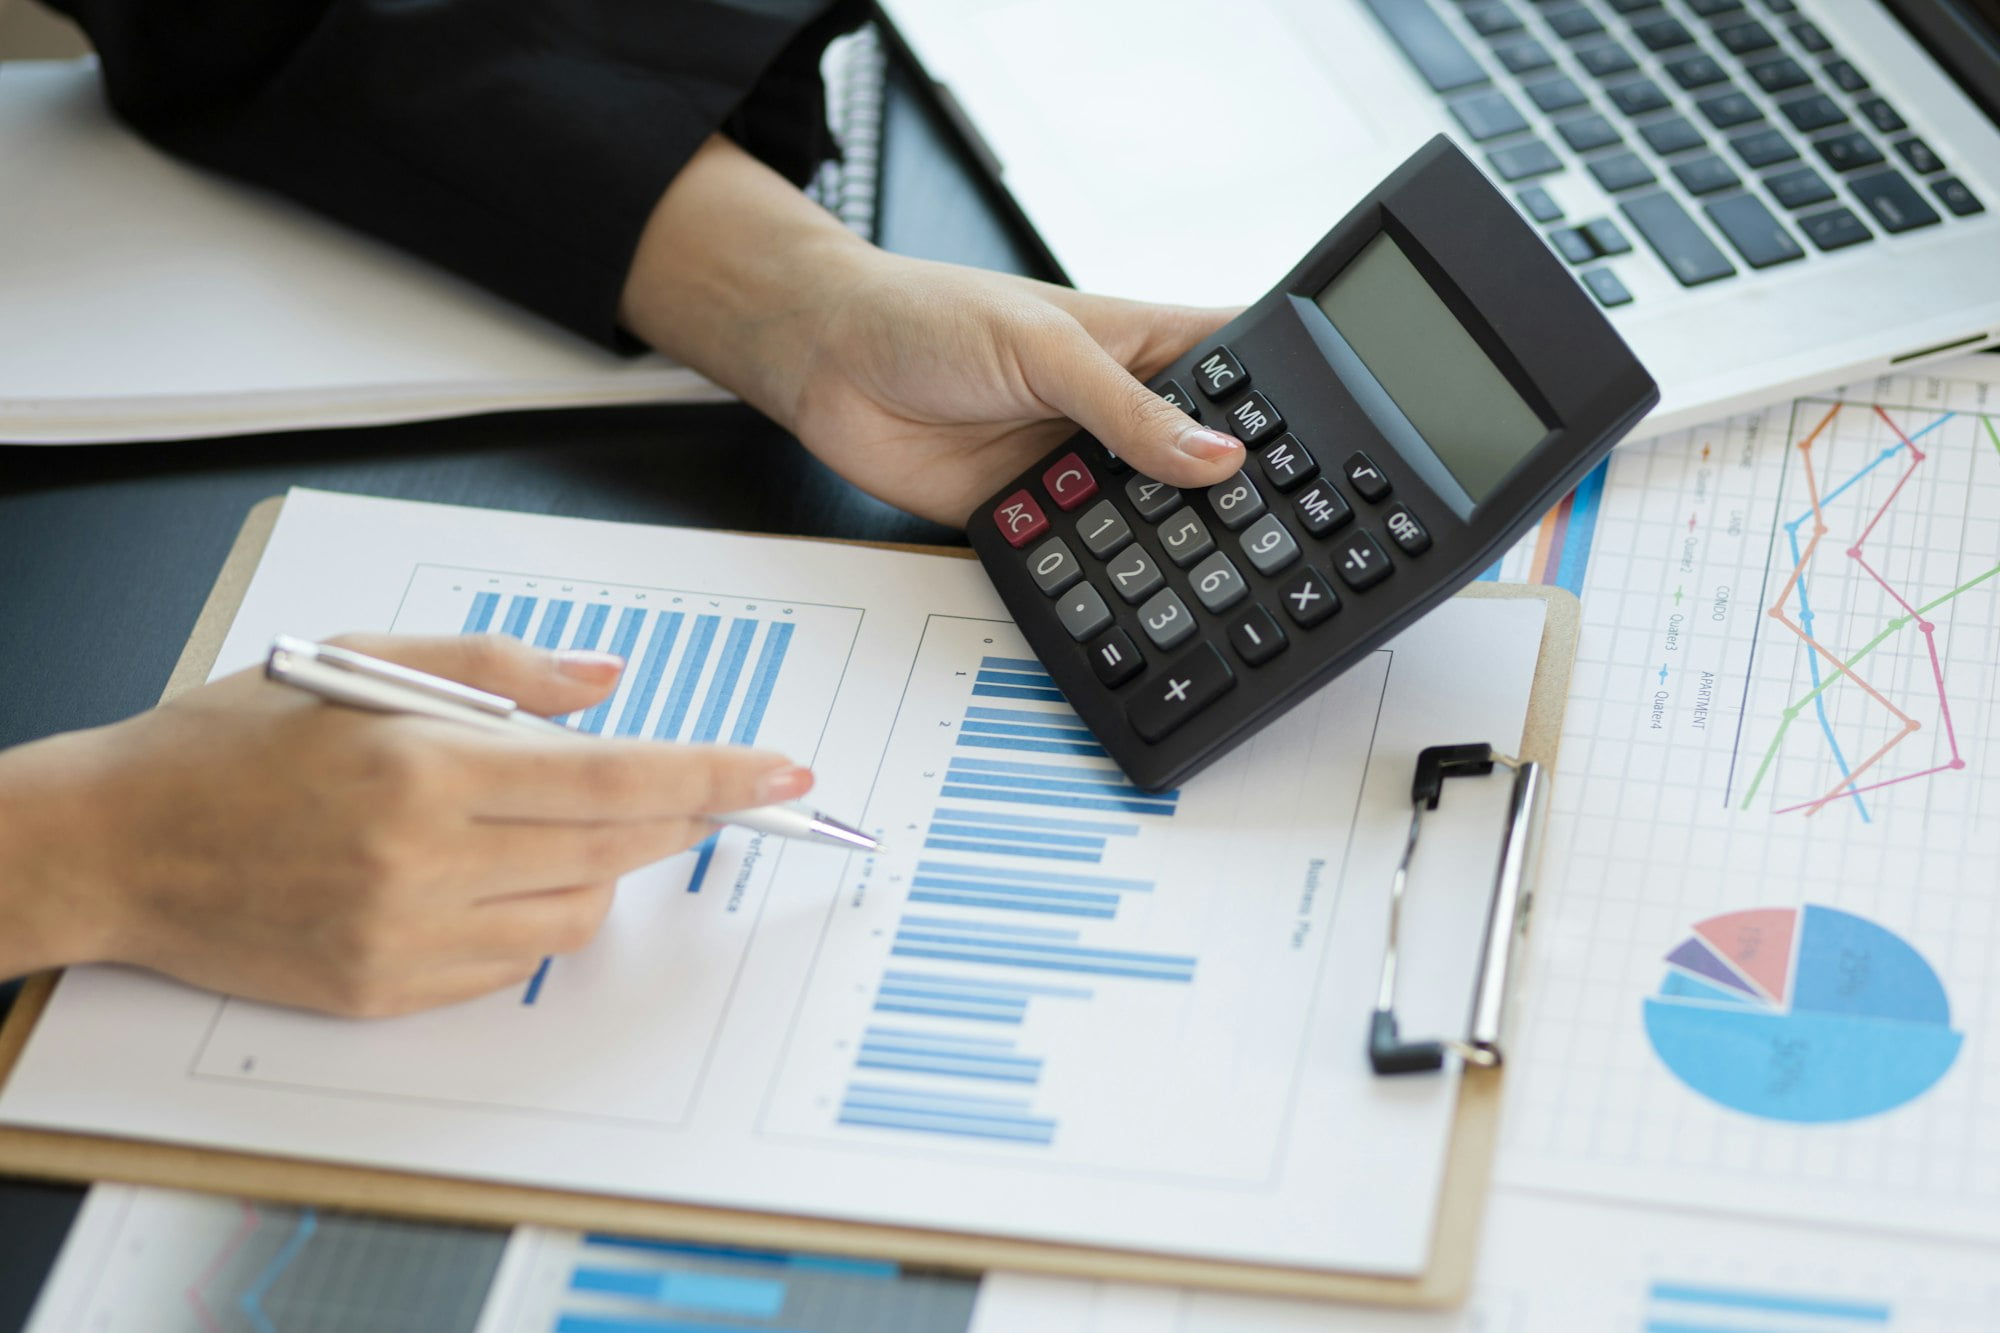 Accounting Analysis and Auditing Concepts